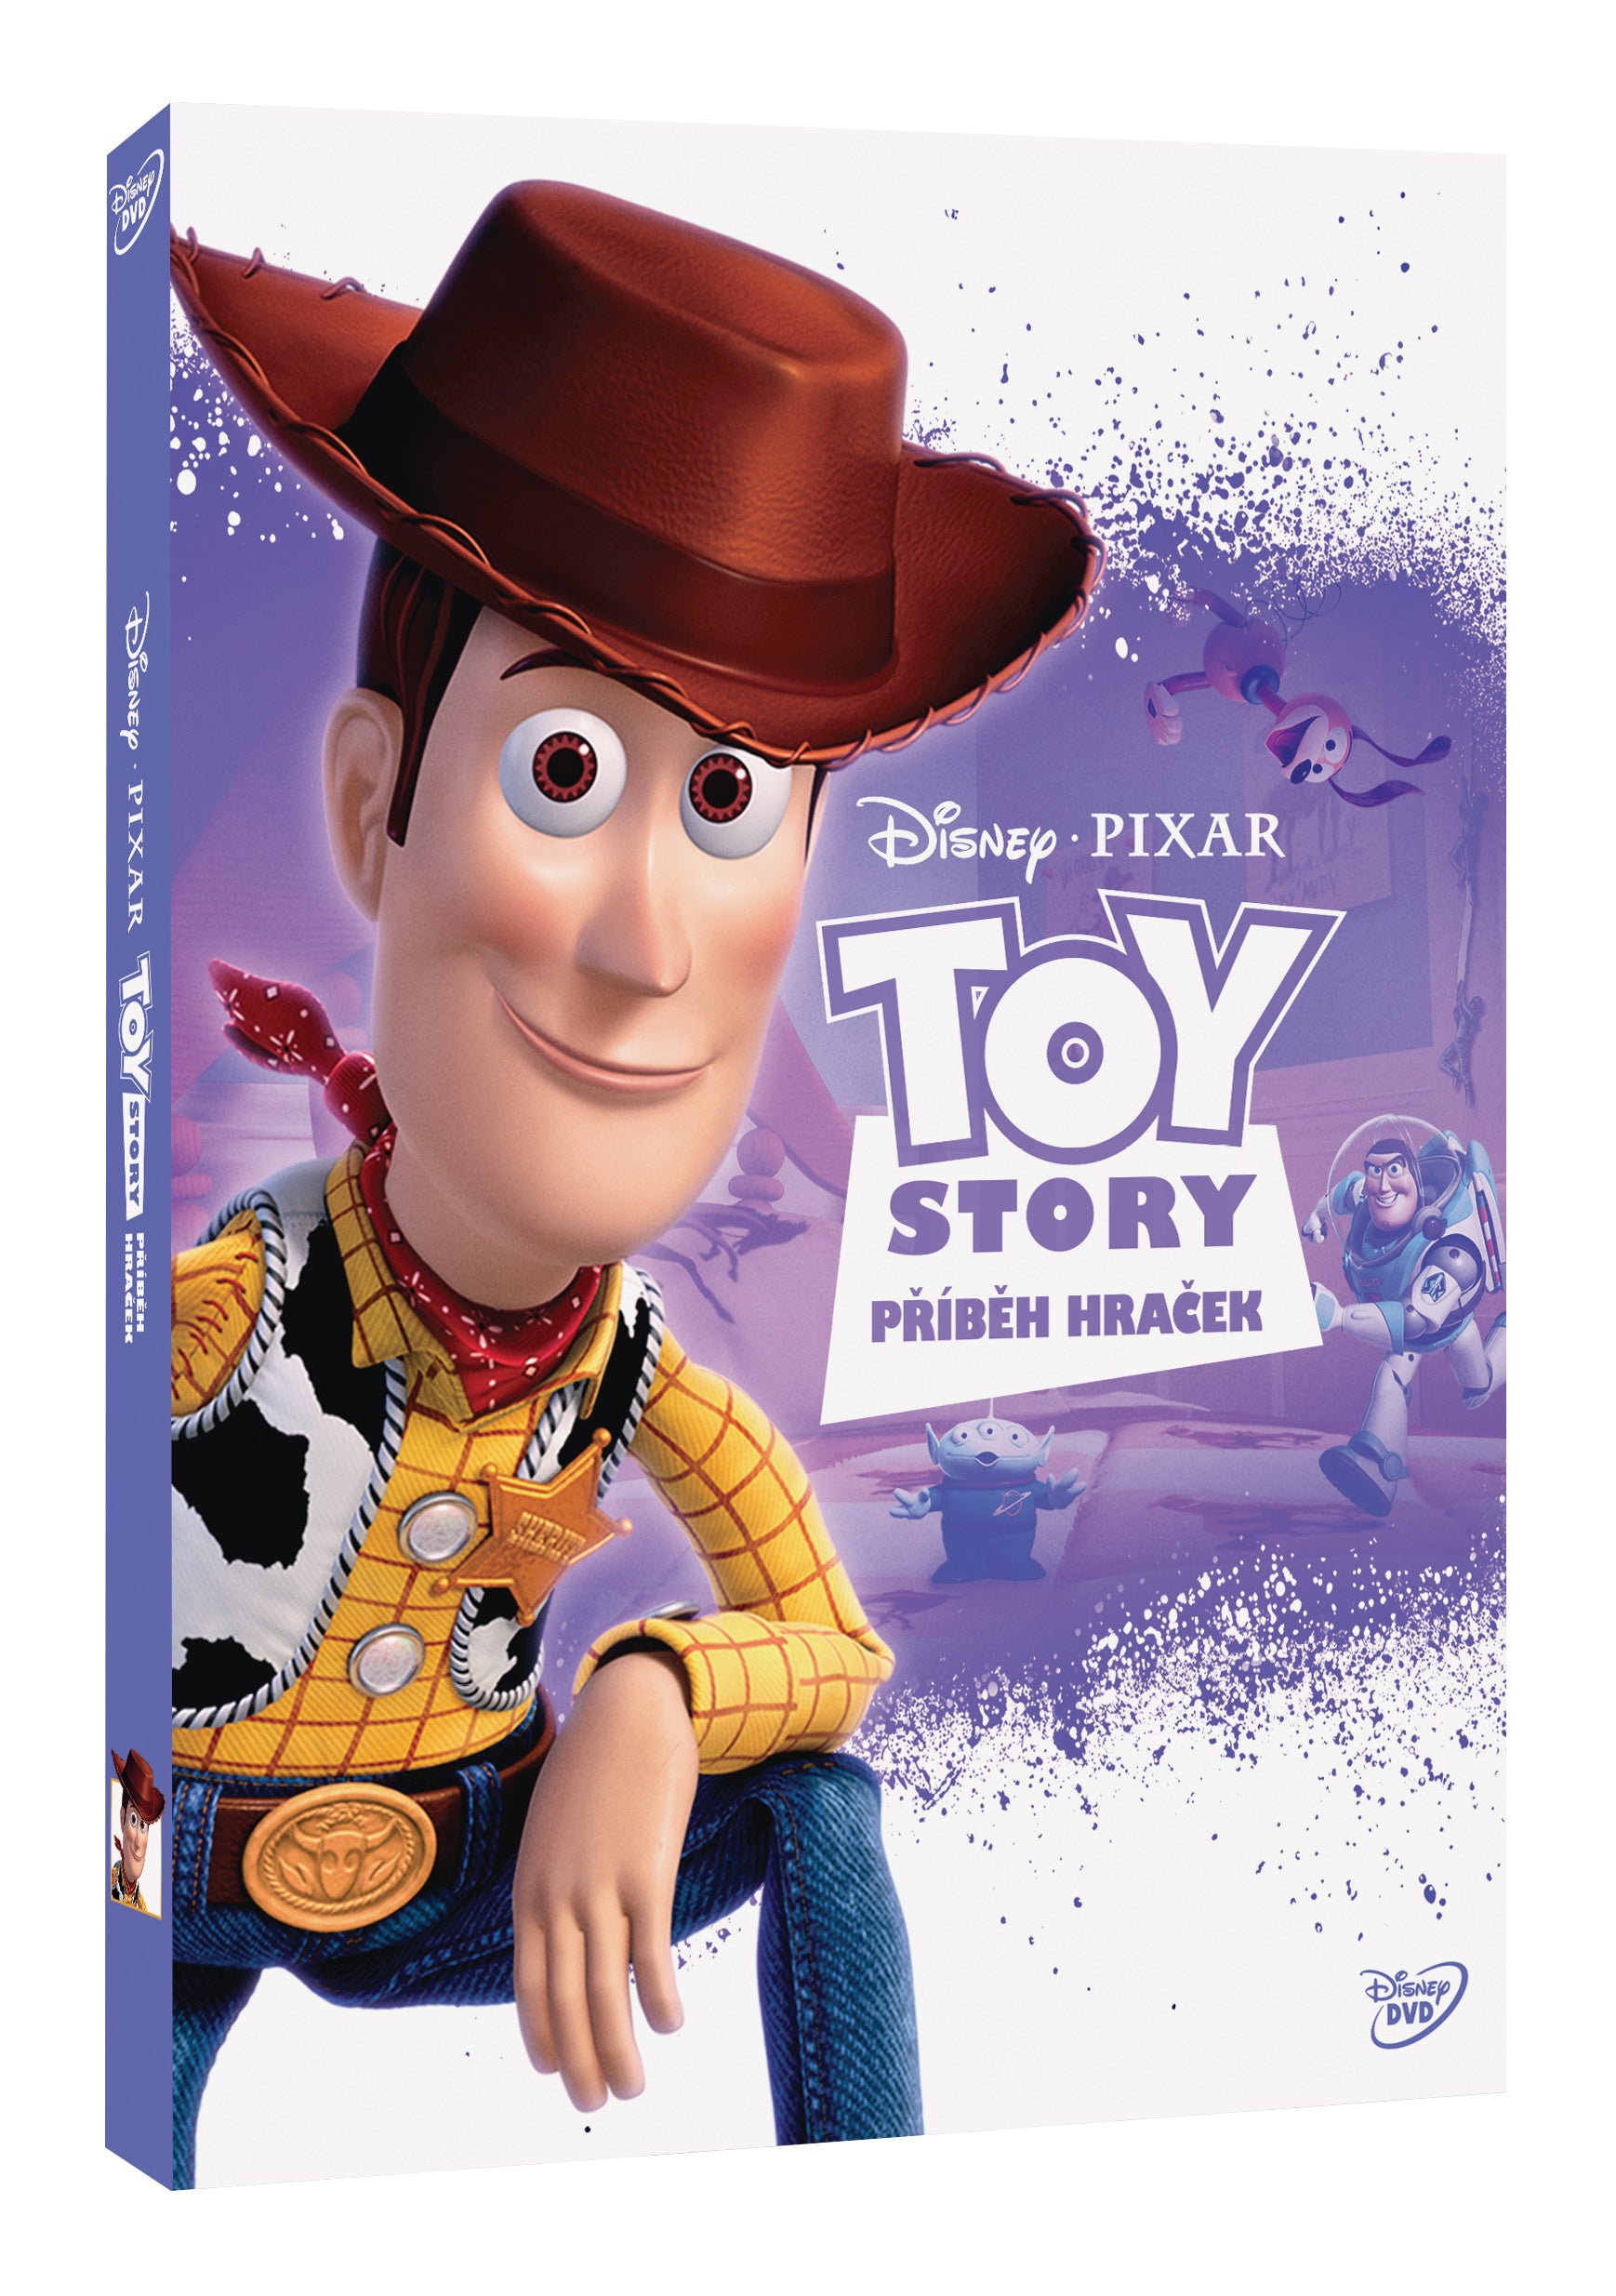 Toy Story: Pribeh hracek S.E. DVD - Edice Pixar New Line / Toy Story Special Edition